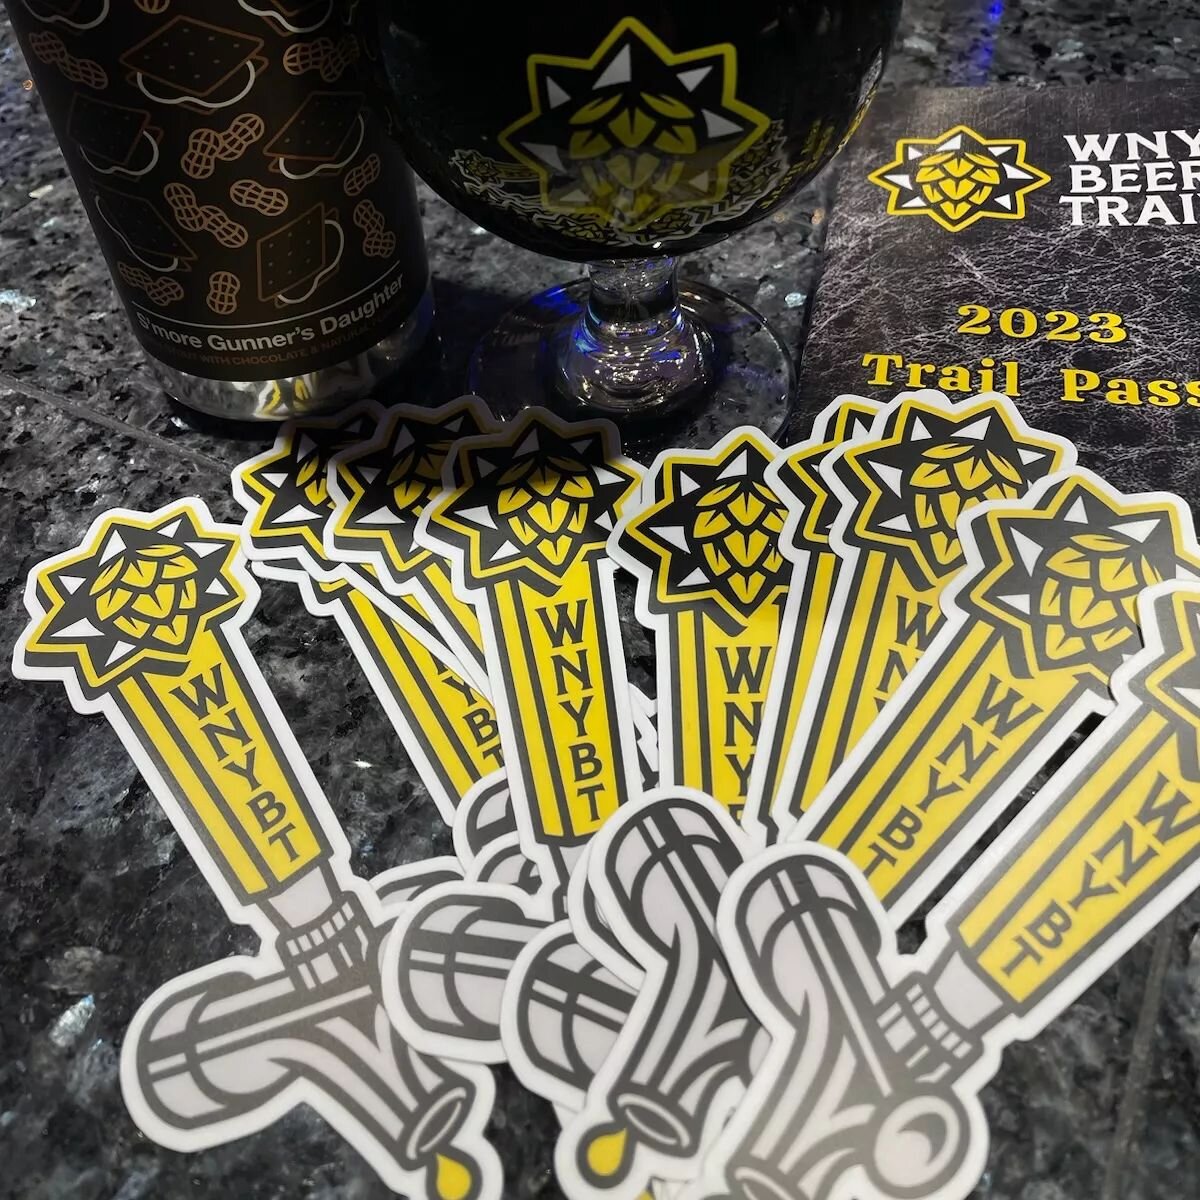 The tap handle got turned into stickers for @wnybeertrail 🍻